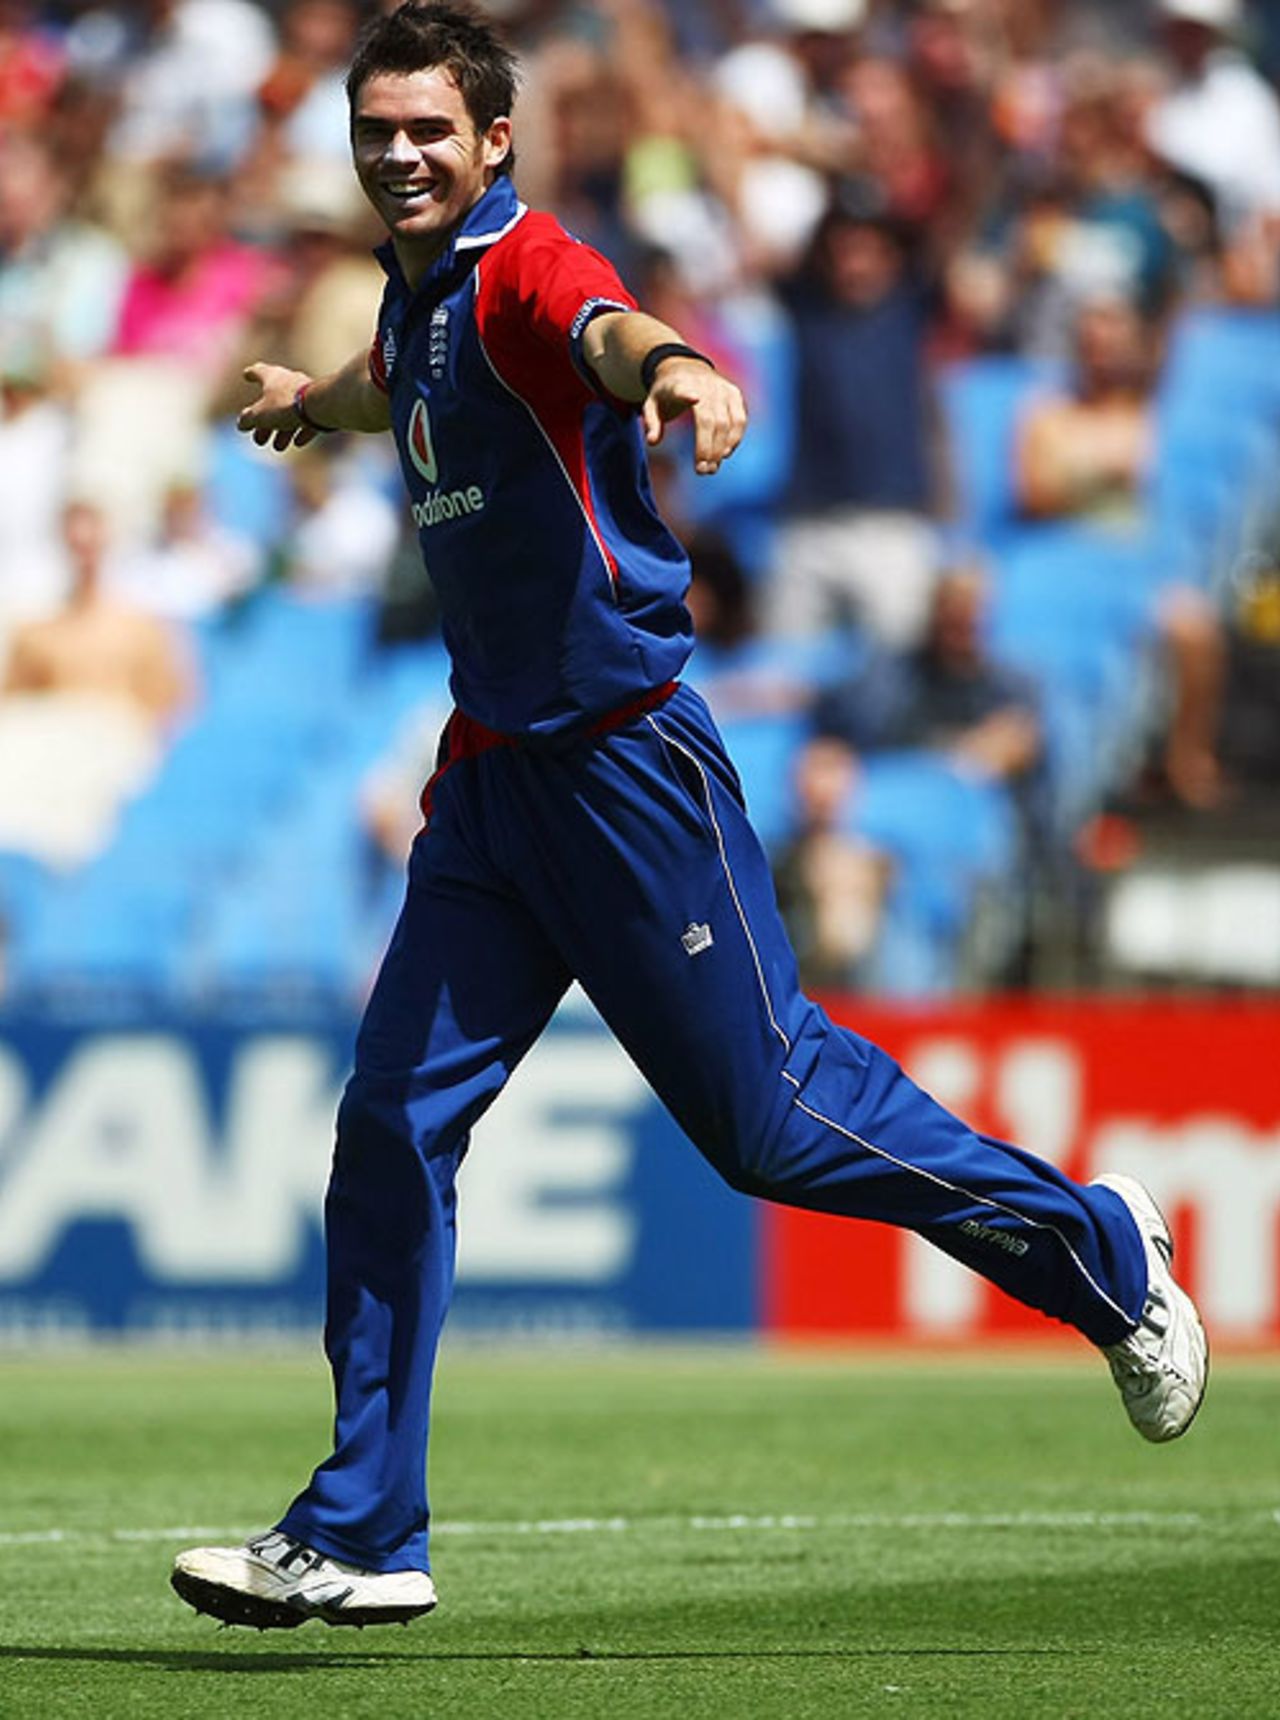 James Anderson struck twice in the first 15 overs, New Zealand v England, 3rd ODI, Auckland, February 15, 2008